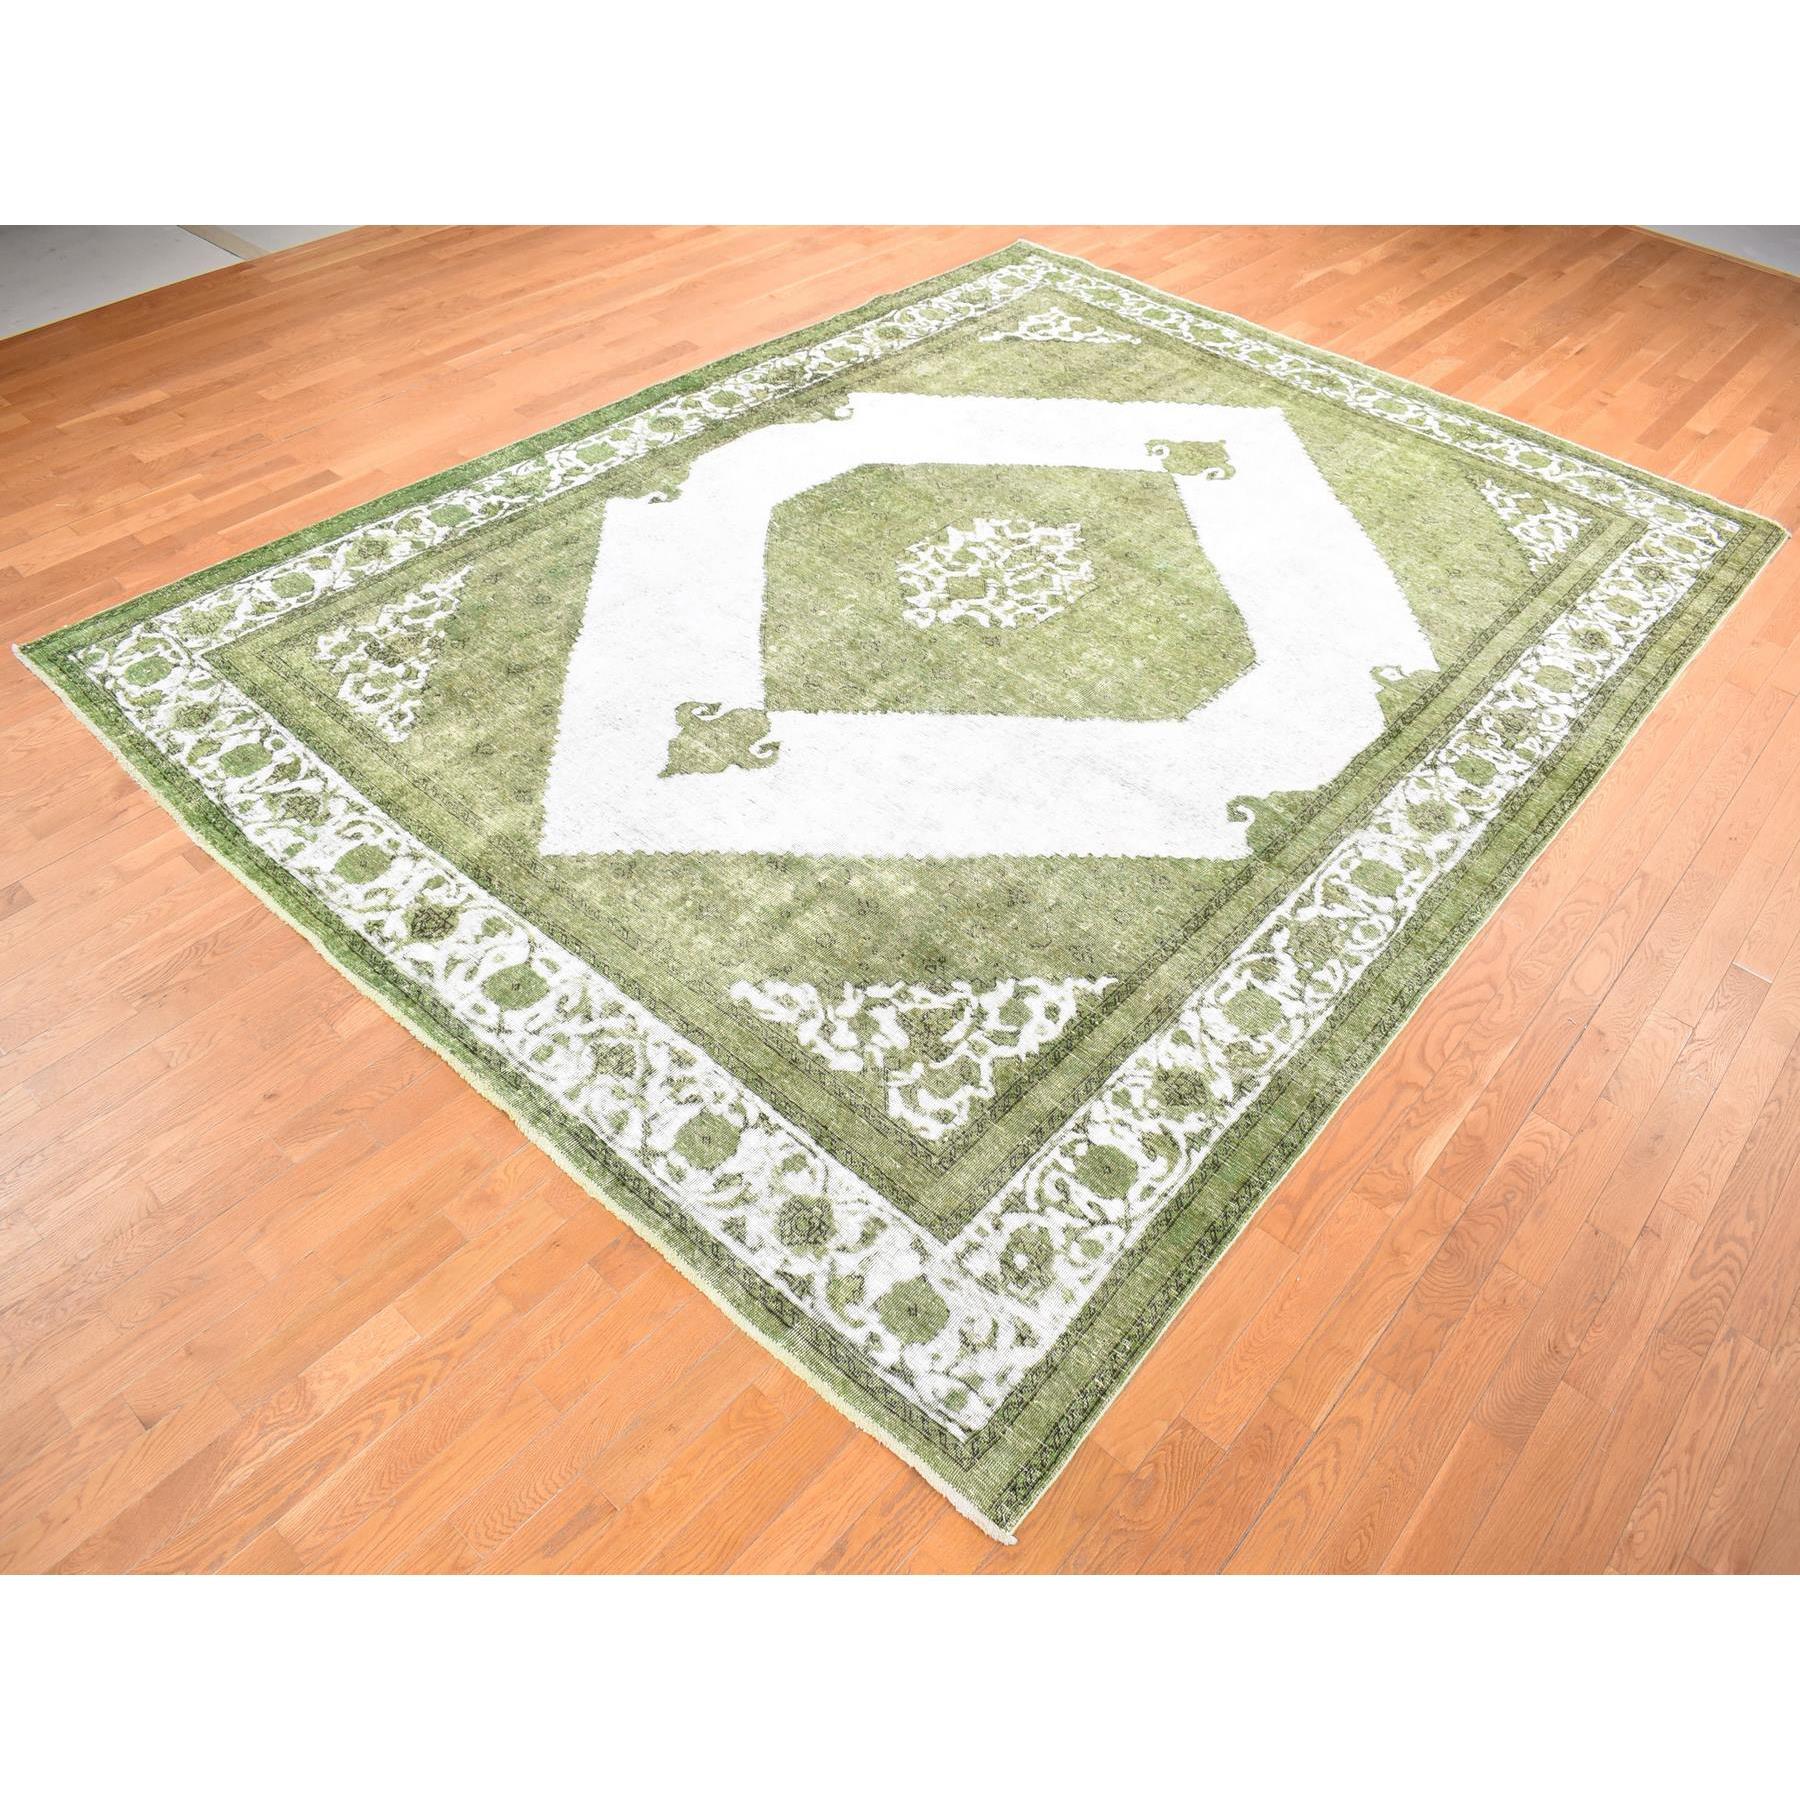 Medieval Green Old Persian Tabriz Open Field Medallion Design Hand Knotted Pure Wool Rug